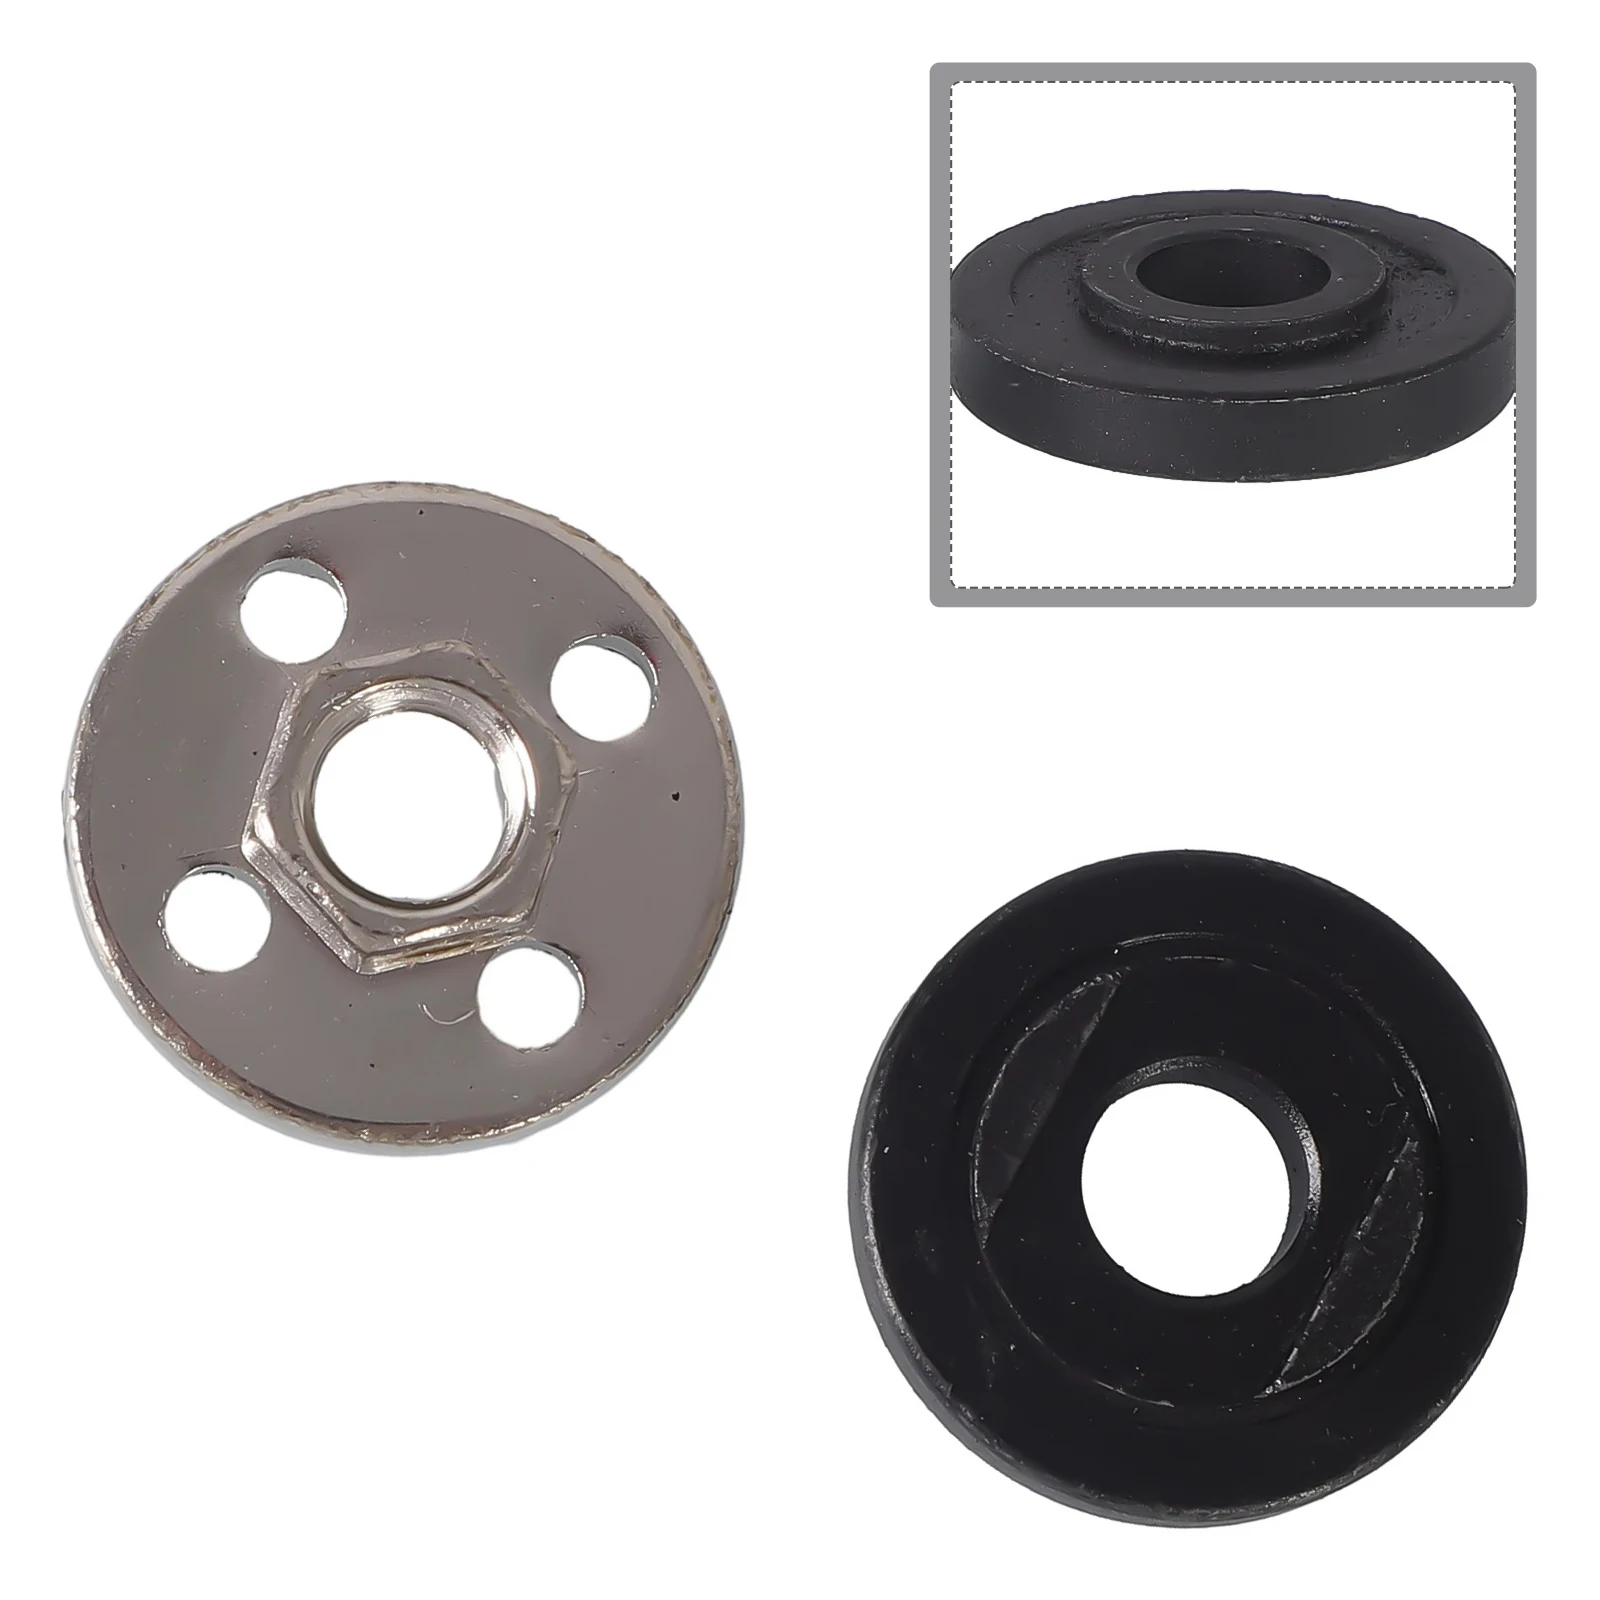 

Brand New Vise Adjustable Wrenches Pressure Plate Pressure Plate Cover Angle Grinder Angle Grinder Pressure Plate Black